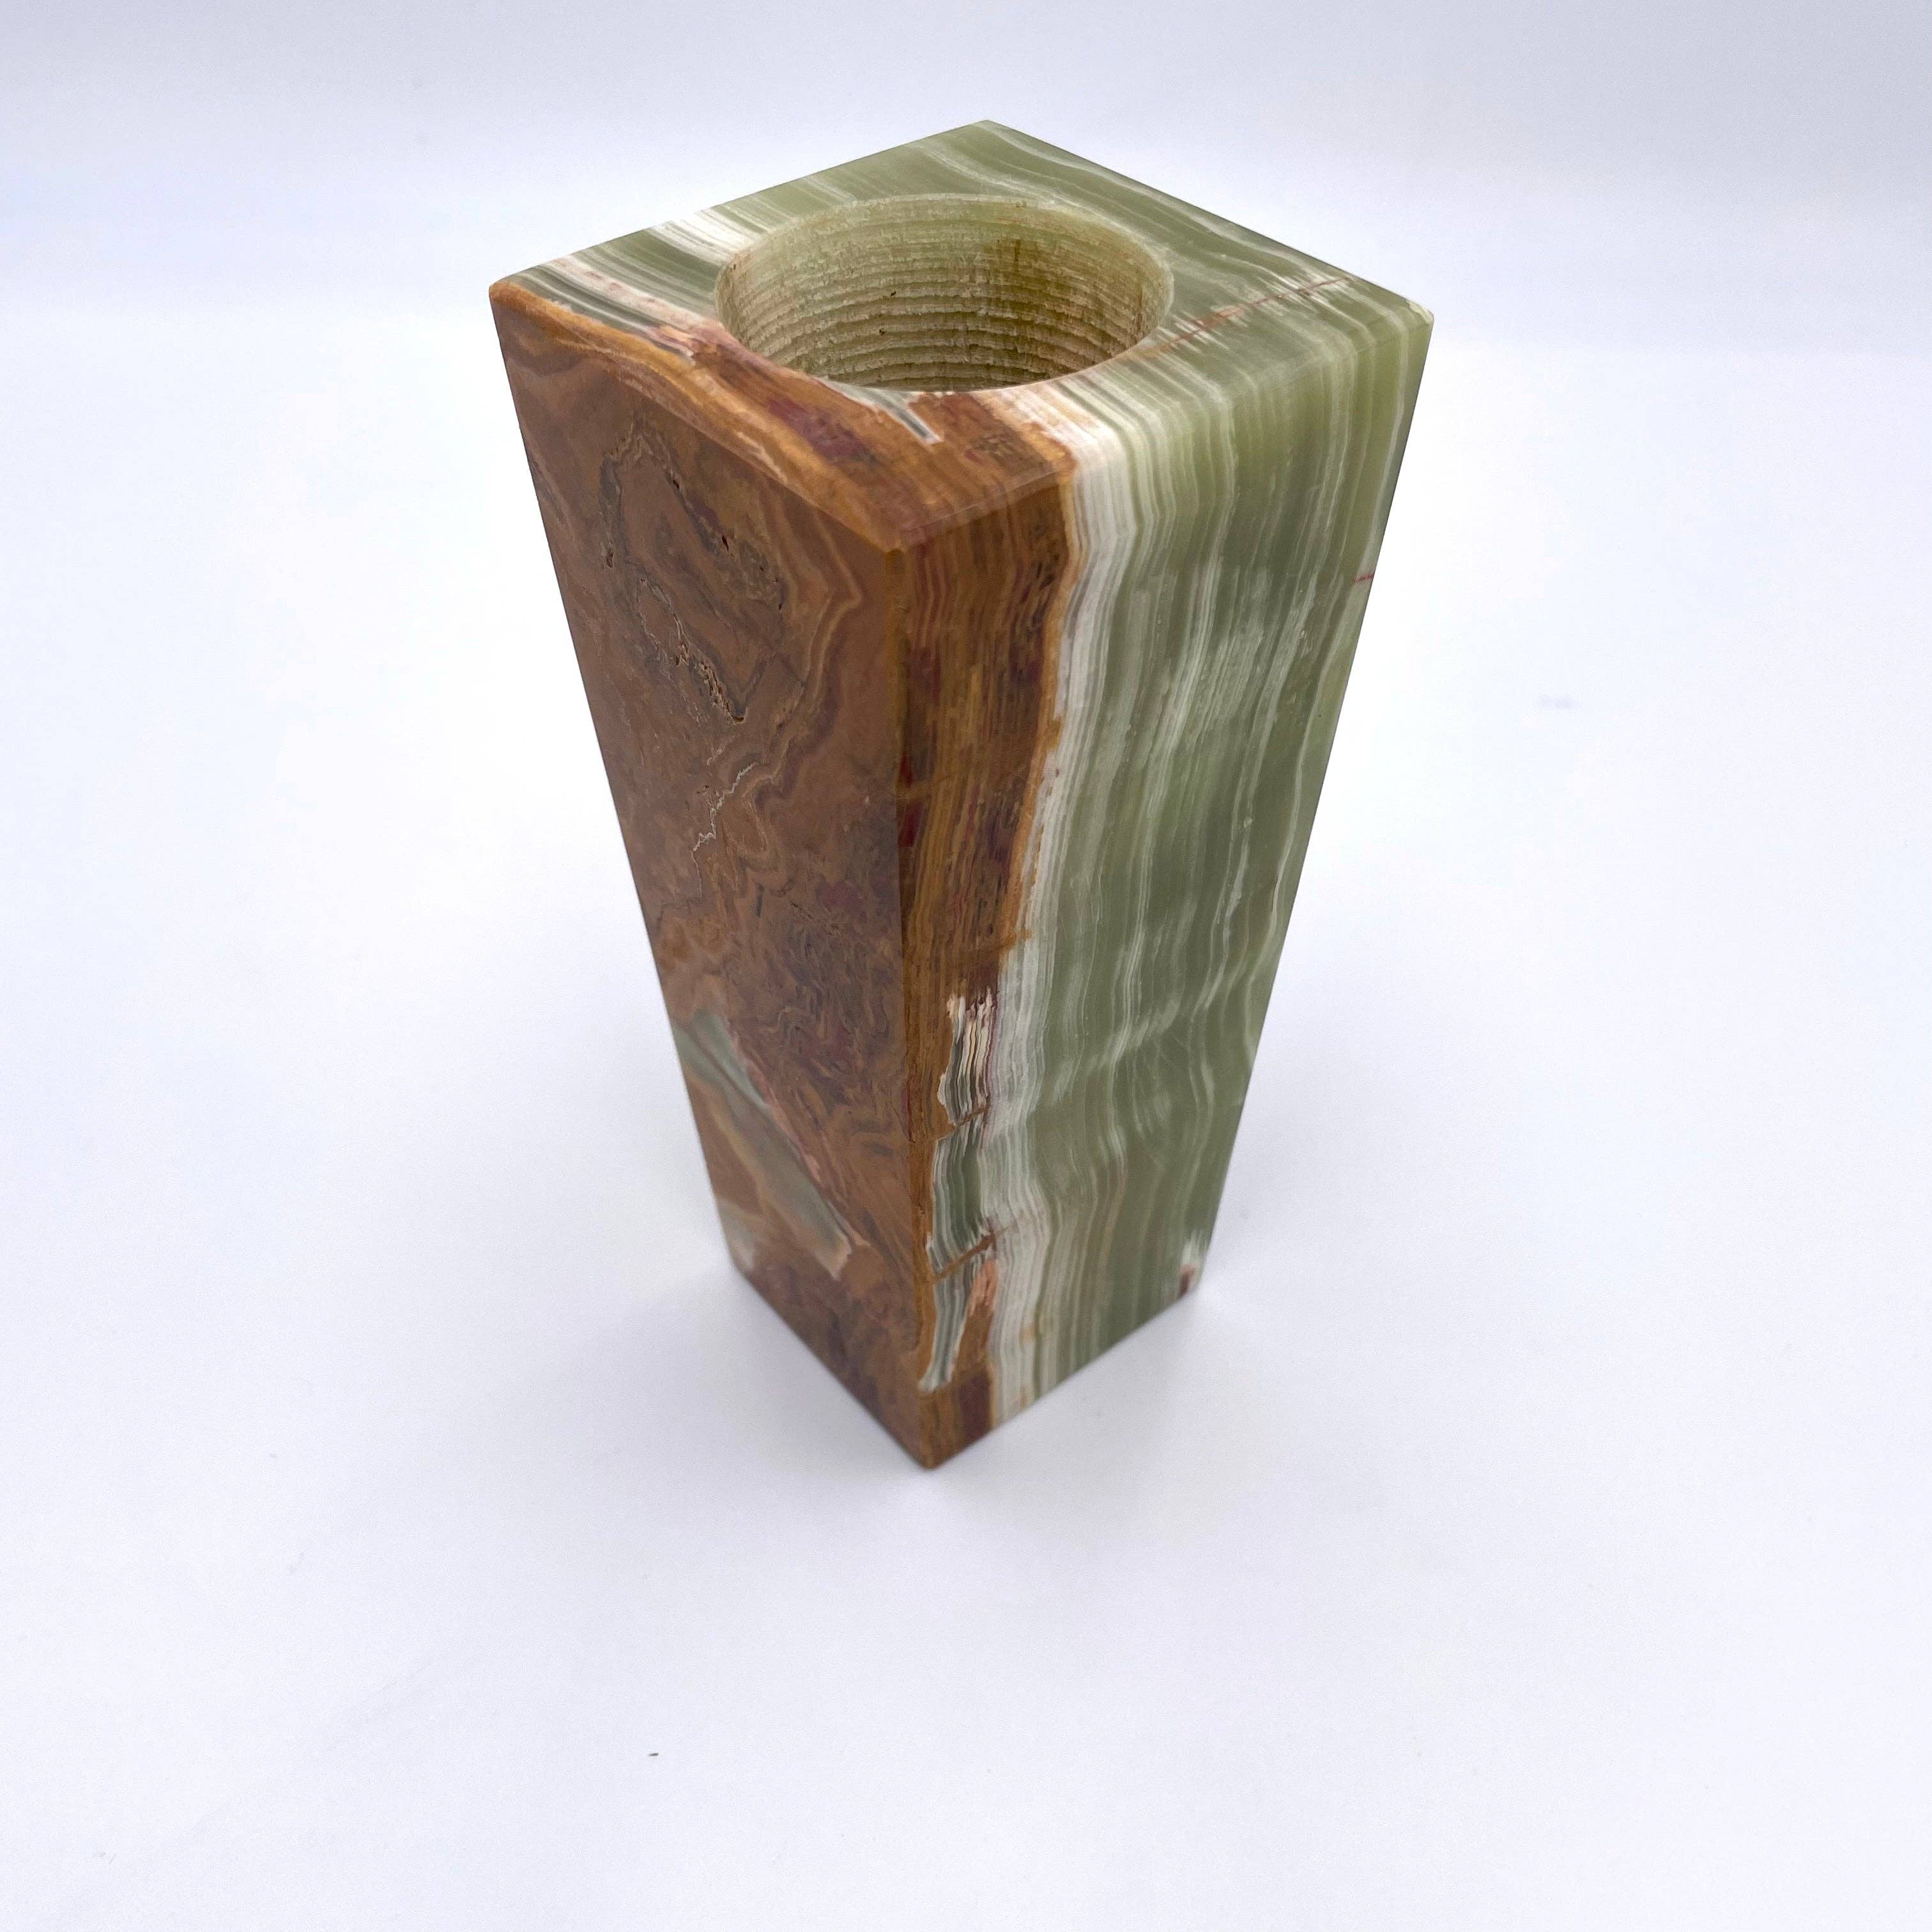 6" Square Vase - Marble and Onyx: Black and Gold Marble